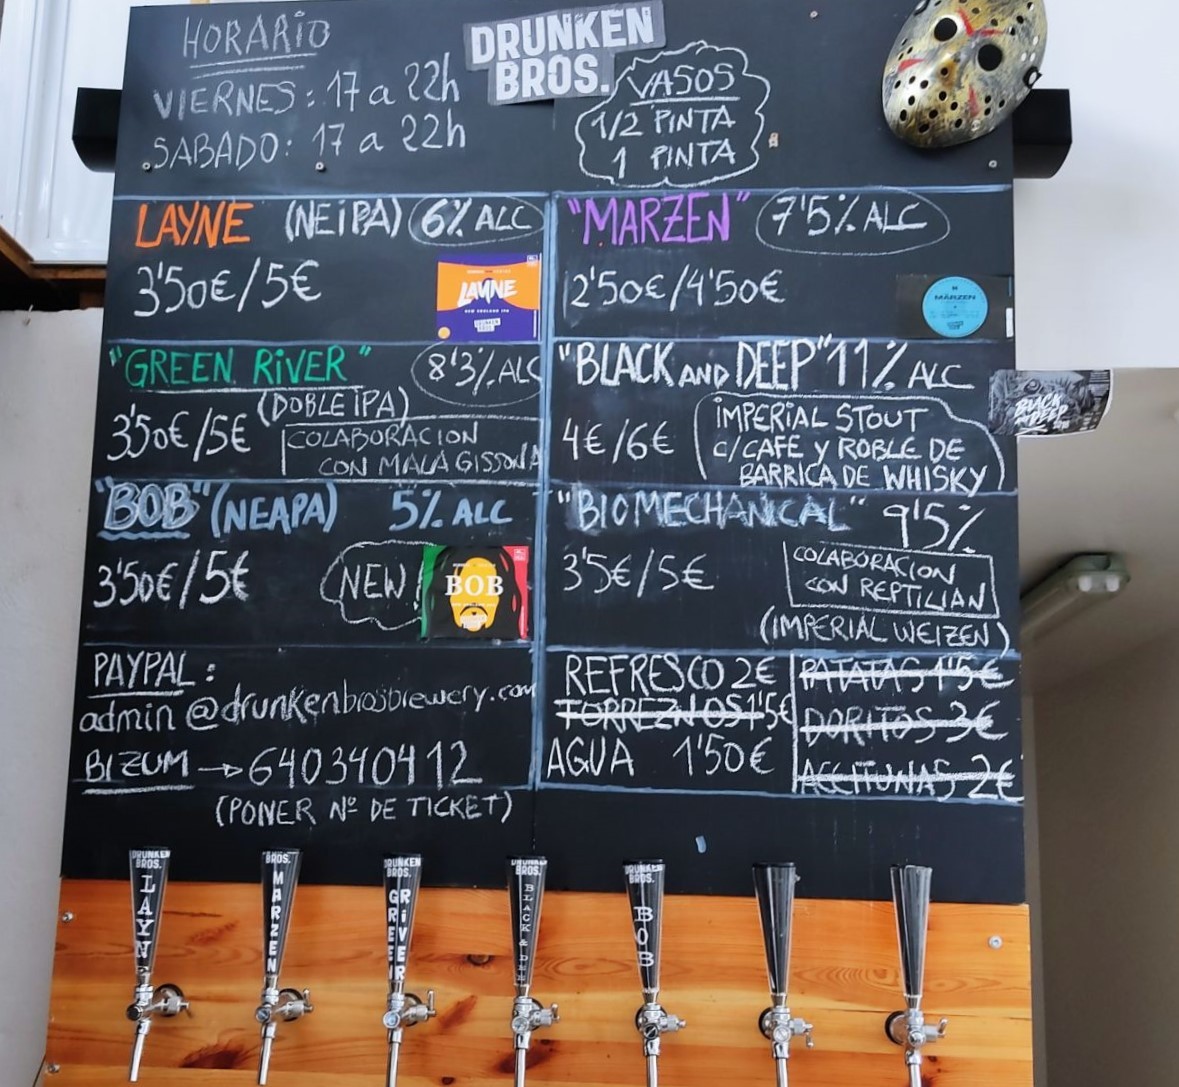 Drunken Bros brewery and taproom | Craft beer in the Basque Country, Spain | Craft Beer Nomads